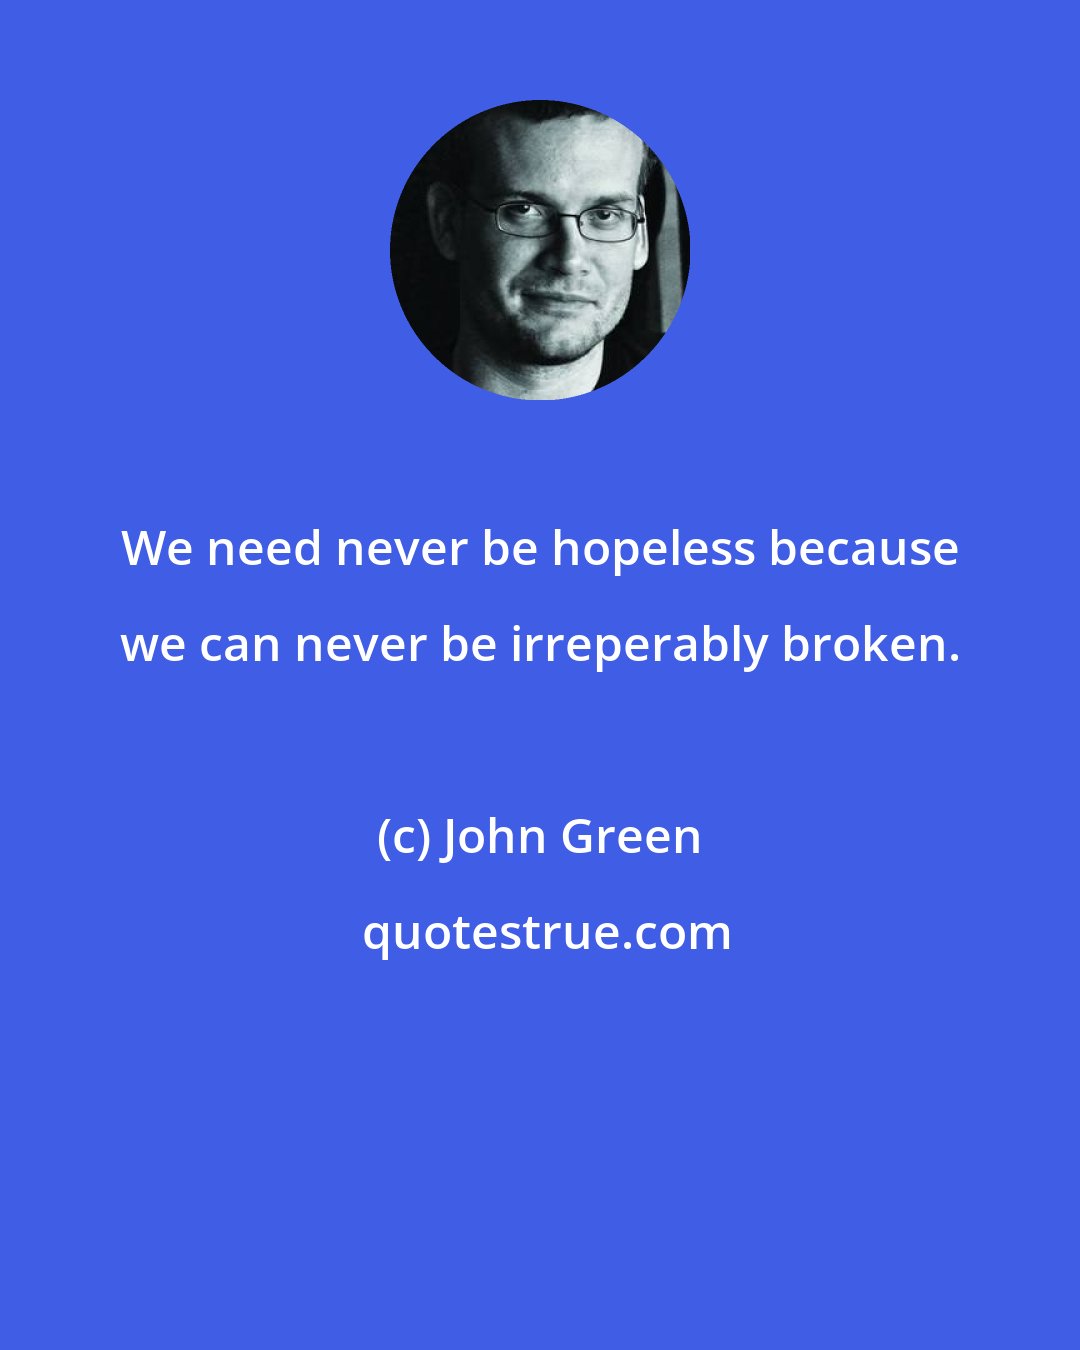 John Green: We need never be hopeless because we can never be irreperably broken.